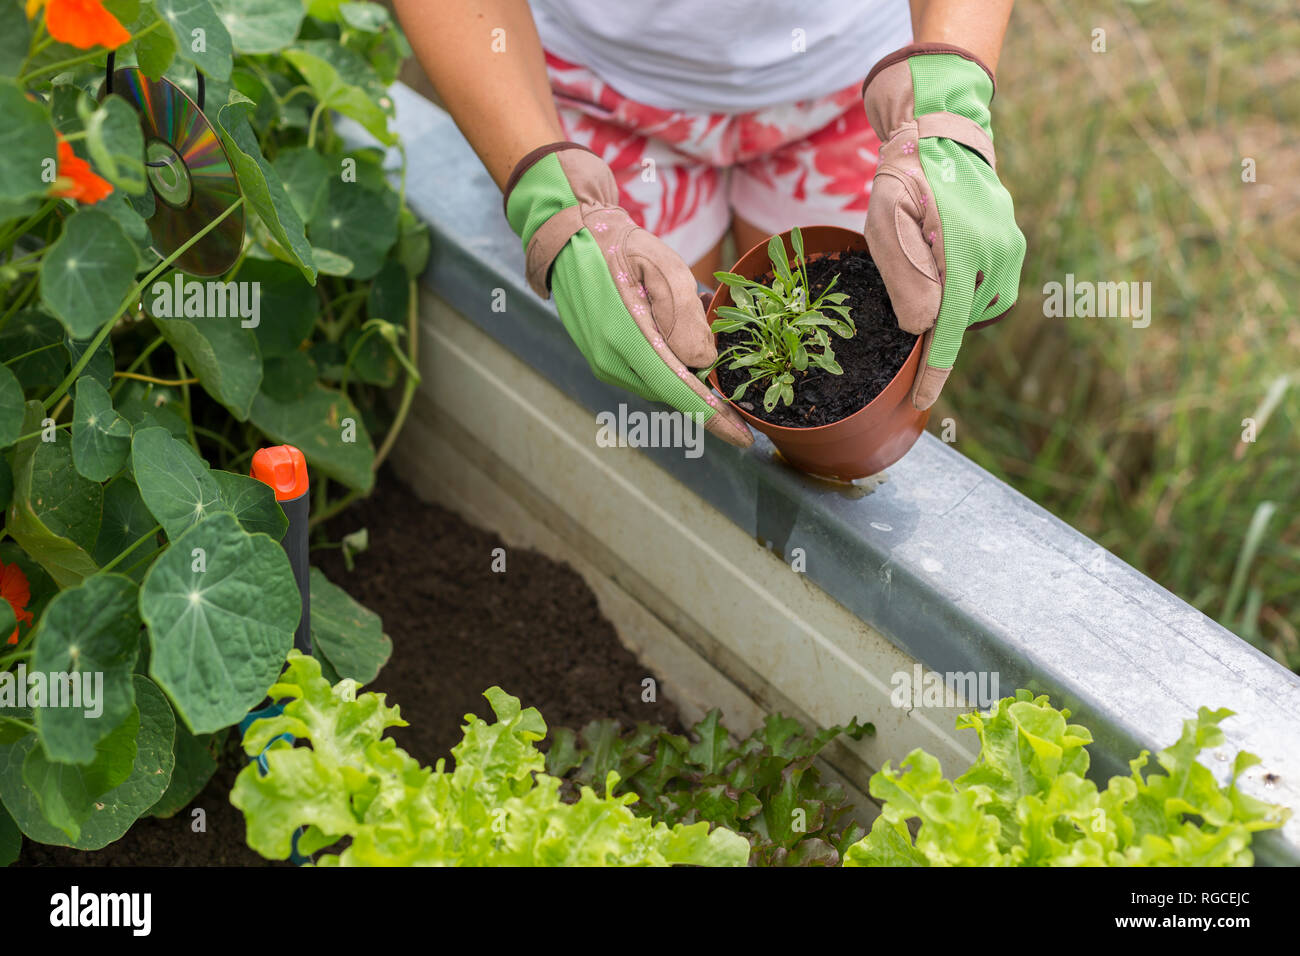 Close-up of woman gardening at raised bed Stock Photo